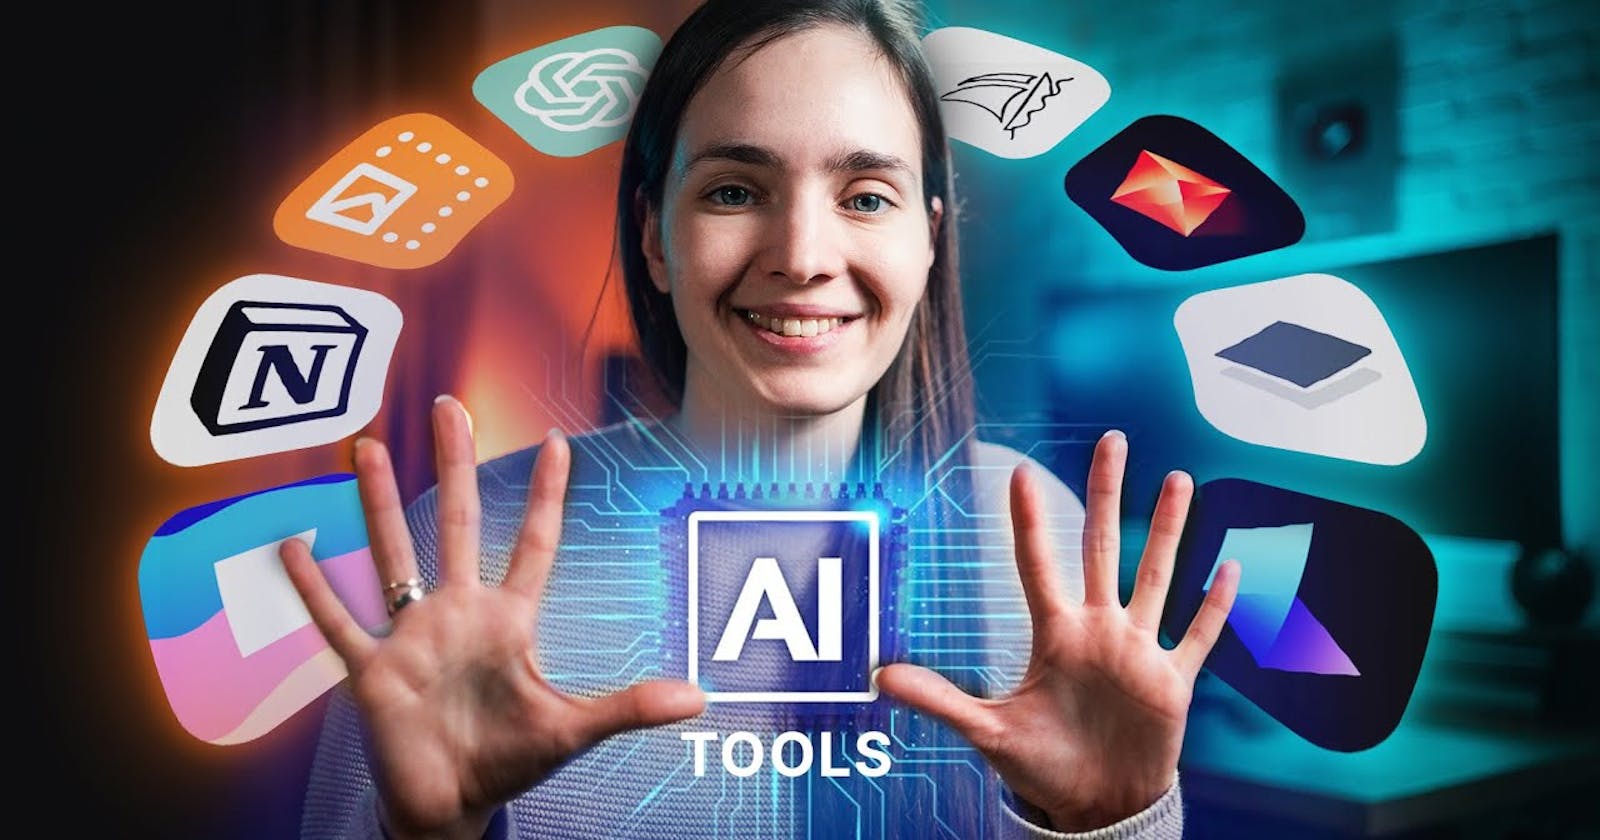 Discover 165+ AI Tools for Your Business